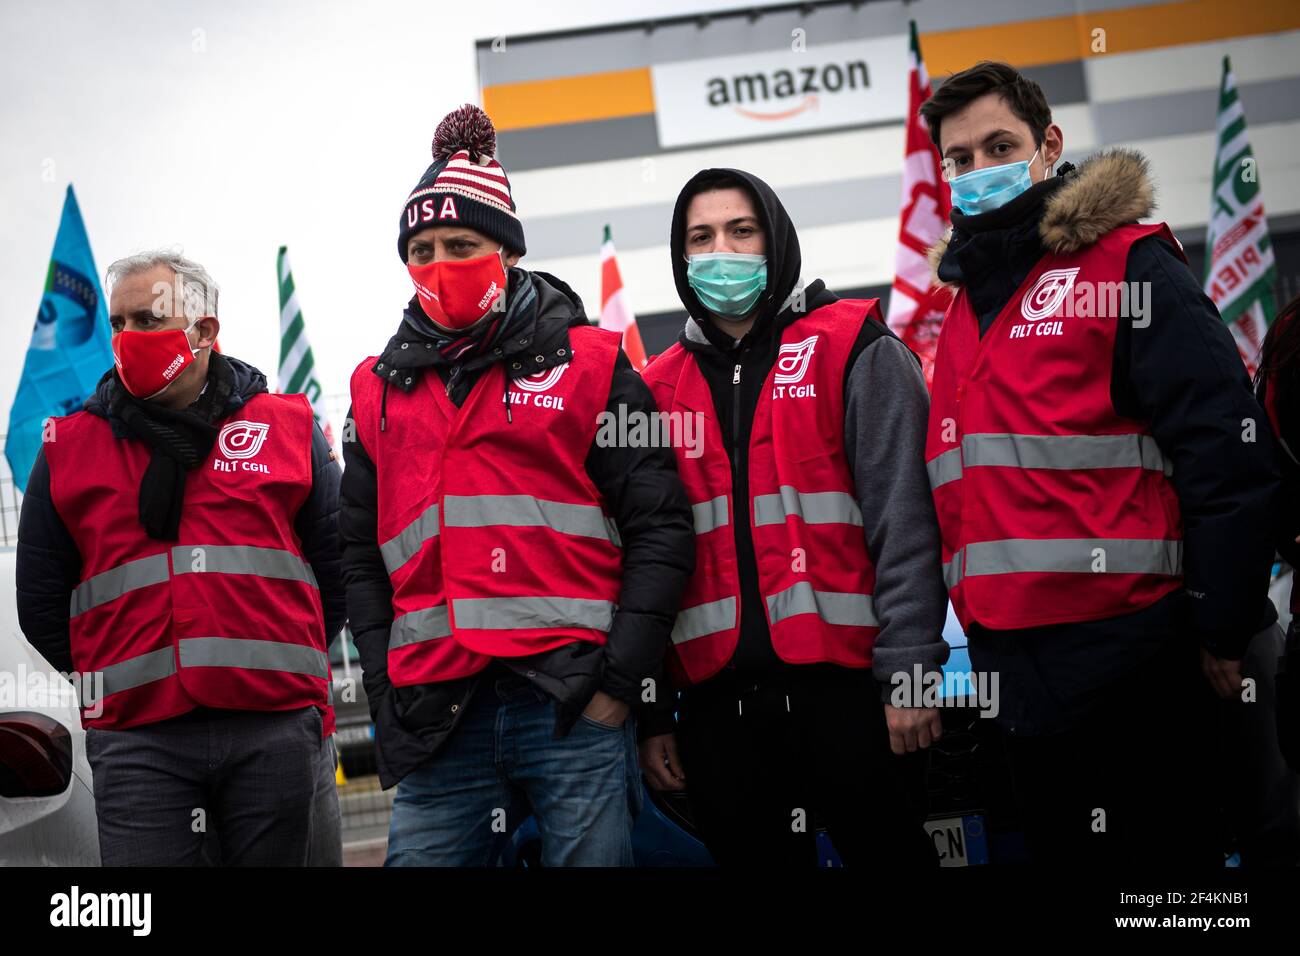 Brandizzo, Italy. 22nd Mar, 2021. BRANDIZZO, ITALY - March 22, 2021:  Amazon's employees of 'Filt CGIL' trade union are seen during a  demonstration for better working conditions in front of the Amazon